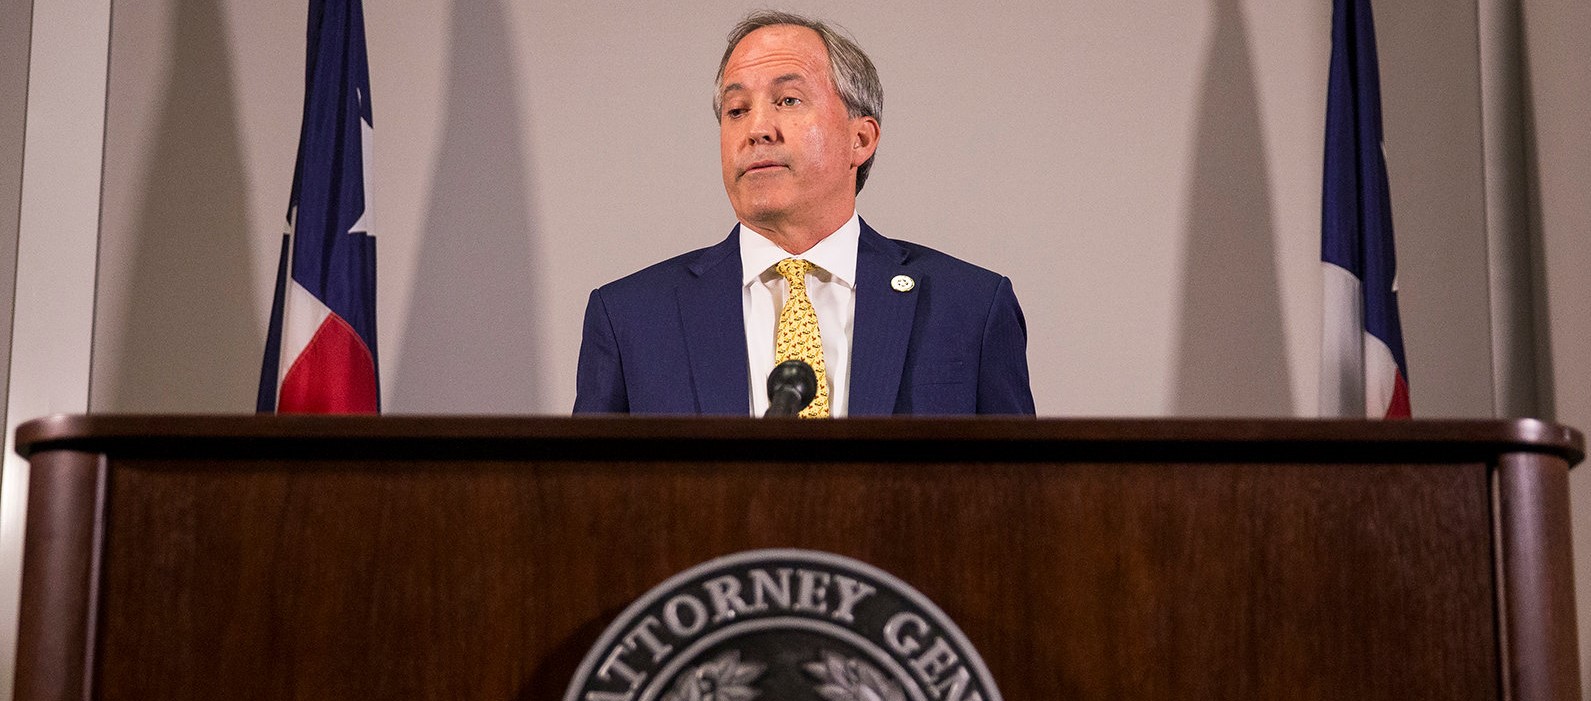 National Civil Rights Group Responds to Attorney General Ken Paxton’s Vote Fraud Allegations